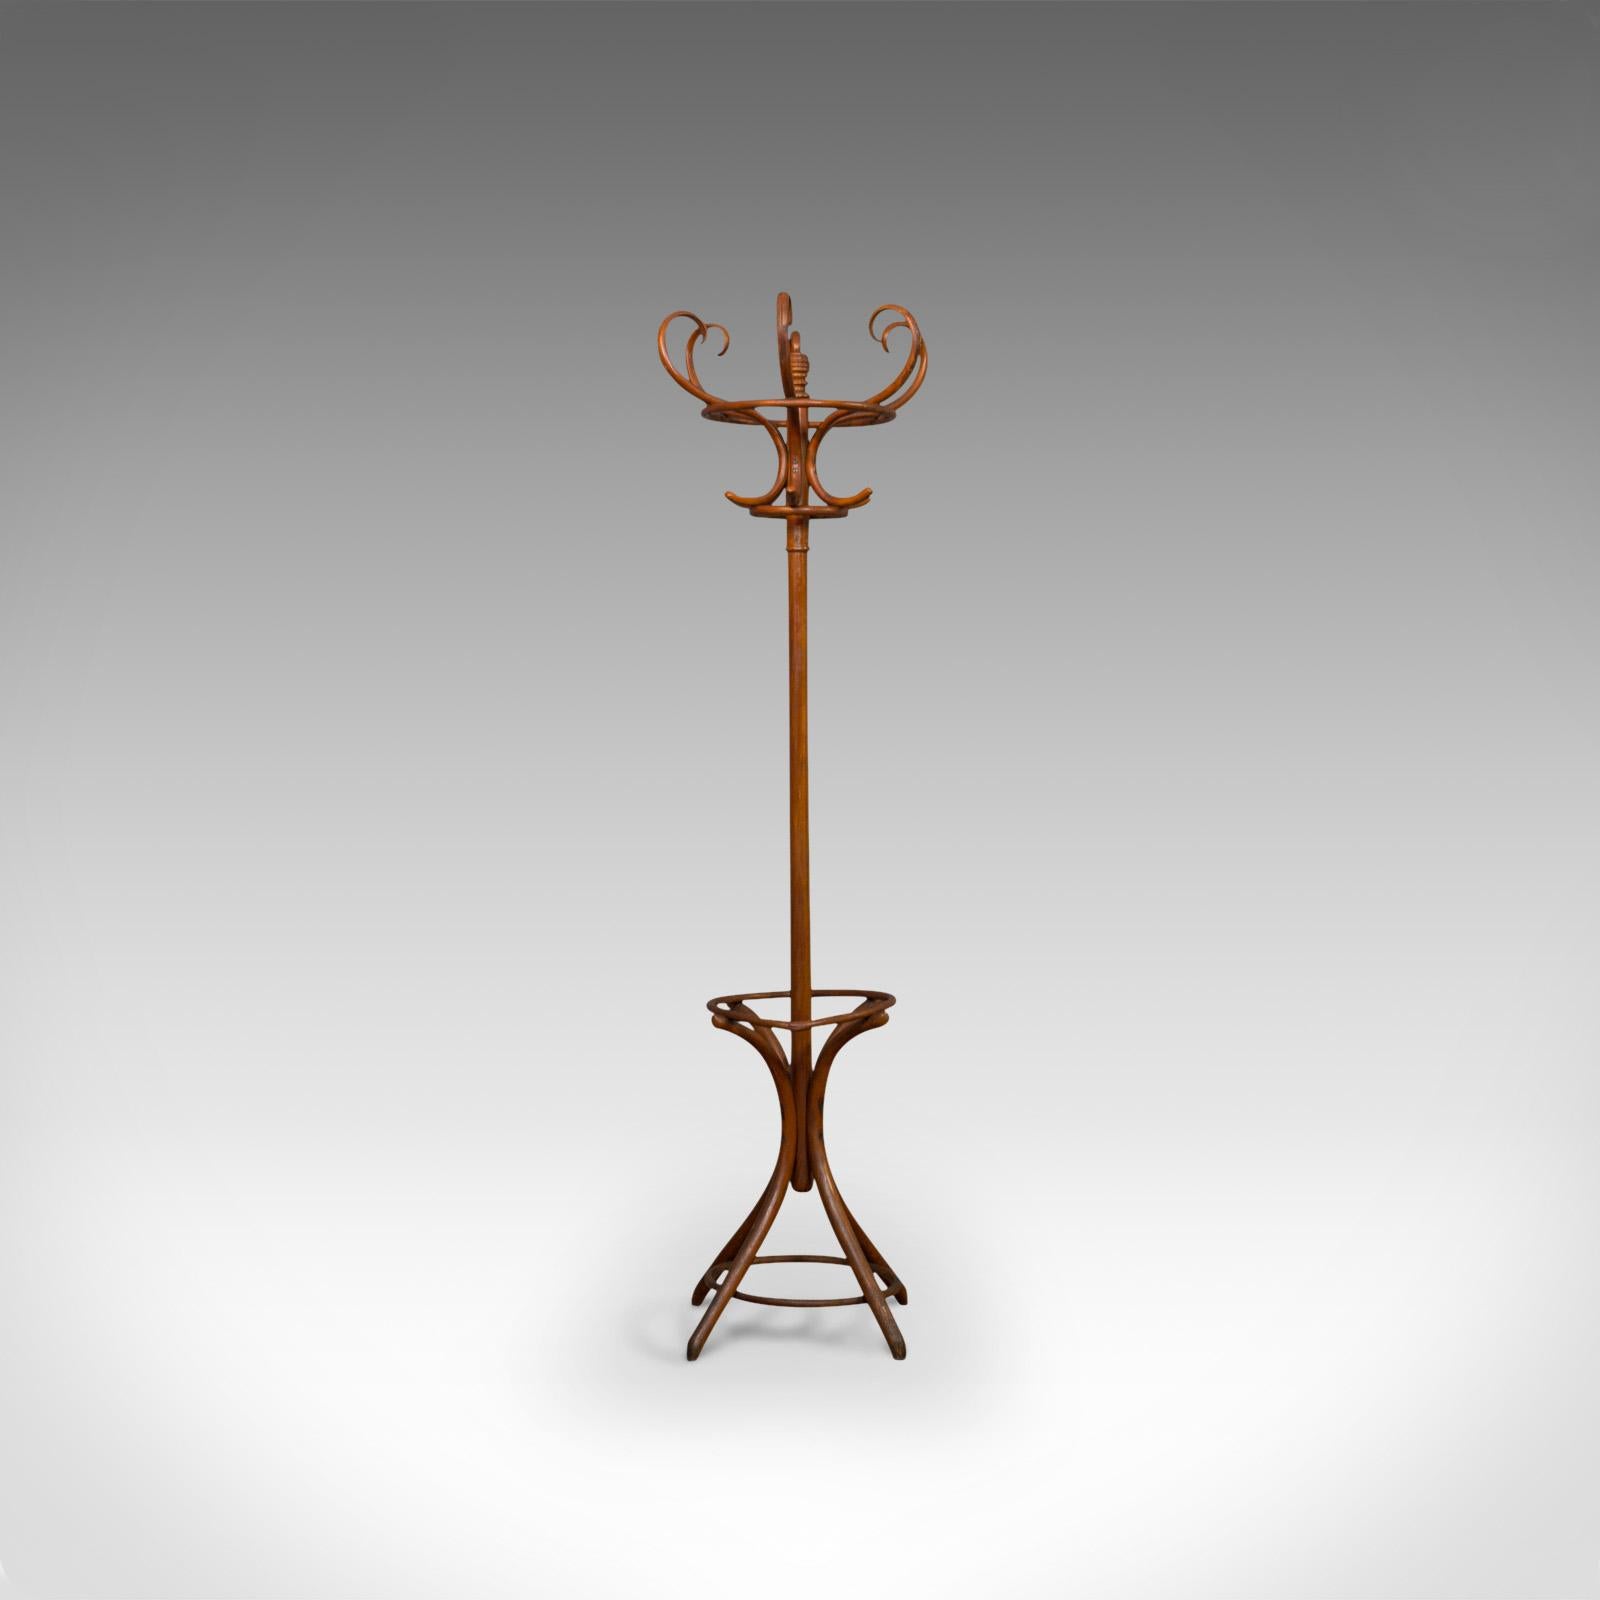 This is an antique bentwood coat rack or hall stand. An English, beech hat, coat, stick or umbrella stand, and dating to the Edwardian period, circa 1910.

Displays good color throughout and a desirable aged patina
Six sinuous 's' curved rails